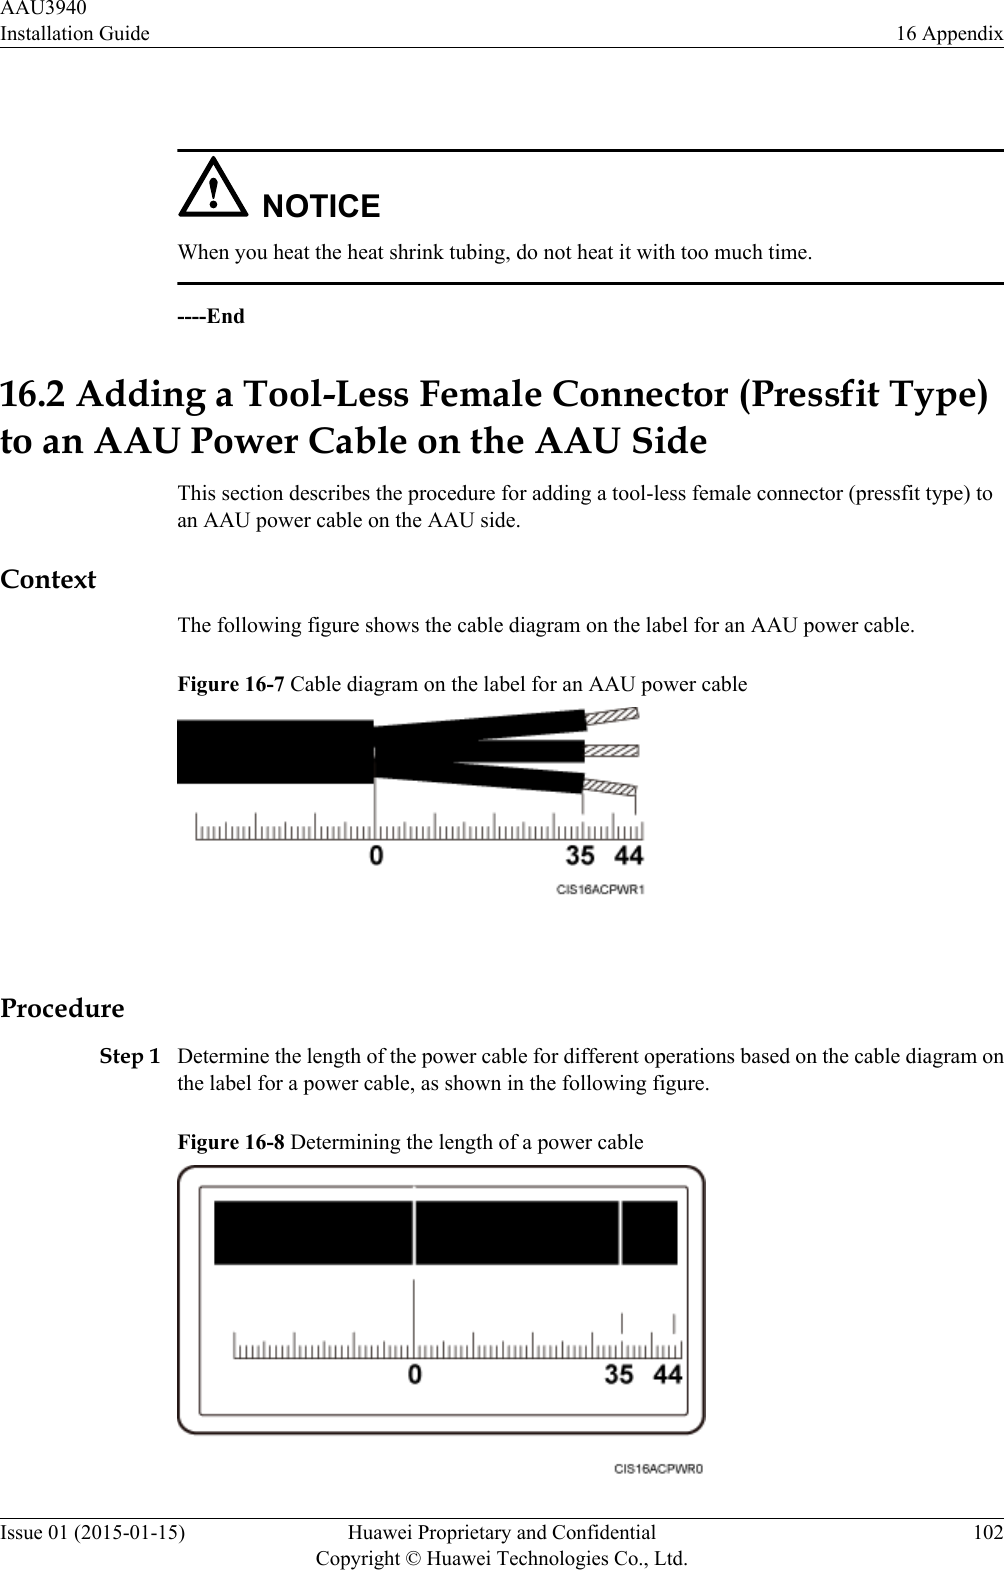  NOTICEWhen you heat the heat shrink tubing, do not heat it with too much time.----End16.2 Adding a Tool-Less Female Connector (Pressfit Type)to an AAU Power Cable on the AAU SideThis section describes the procedure for adding a tool-less female connector (pressfit type) toan AAU power cable on the AAU side.ContextThe following figure shows the cable diagram on the label for an AAU power cable.Figure 16-7 Cable diagram on the label for an AAU power cable ProcedureStep 1 Determine the length of the power cable for different operations based on the cable diagram onthe label for a power cable, as shown in the following figure.Figure 16-8 Determining the length of a power cableAAU3940Installation Guide 16 AppendixIssue 01 (2015-01-15) Huawei Proprietary and ConfidentialCopyright © Huawei Technologies Co., Ltd.102